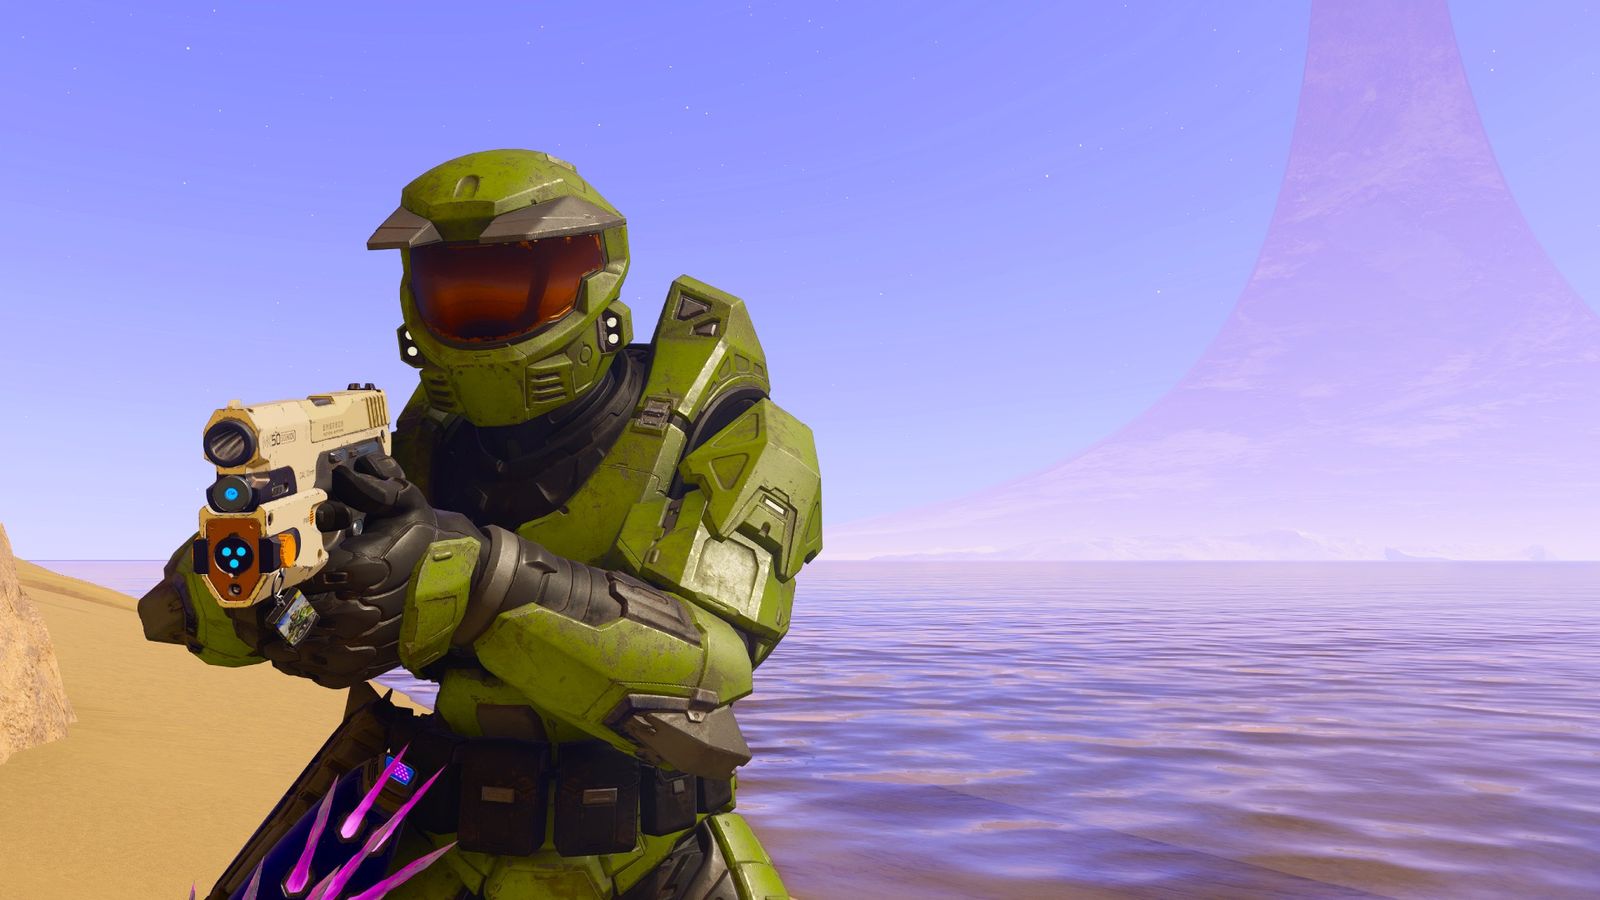 Halo Infinite Forge’s The Silent Cartographer mission with Master Chief on the beach 